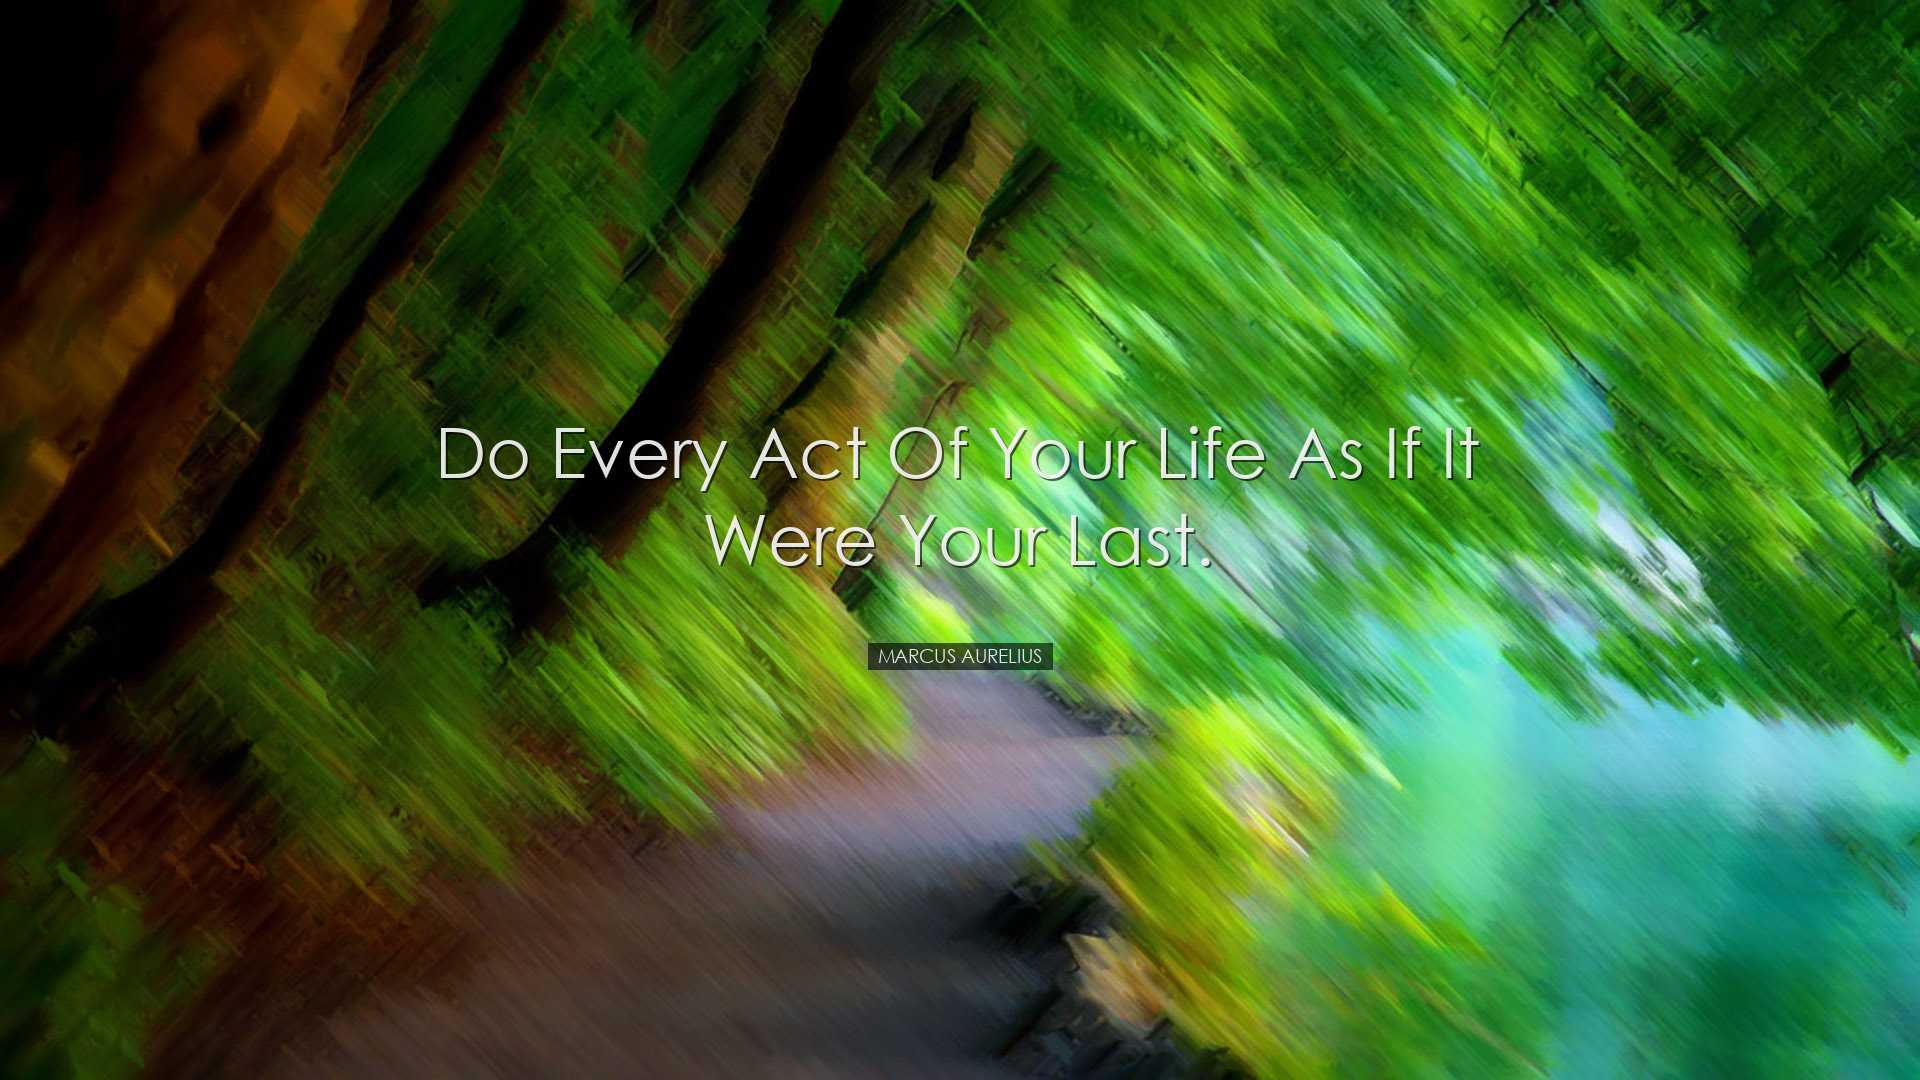 Do every act of your life as if it were your last. - Marcus Aureli